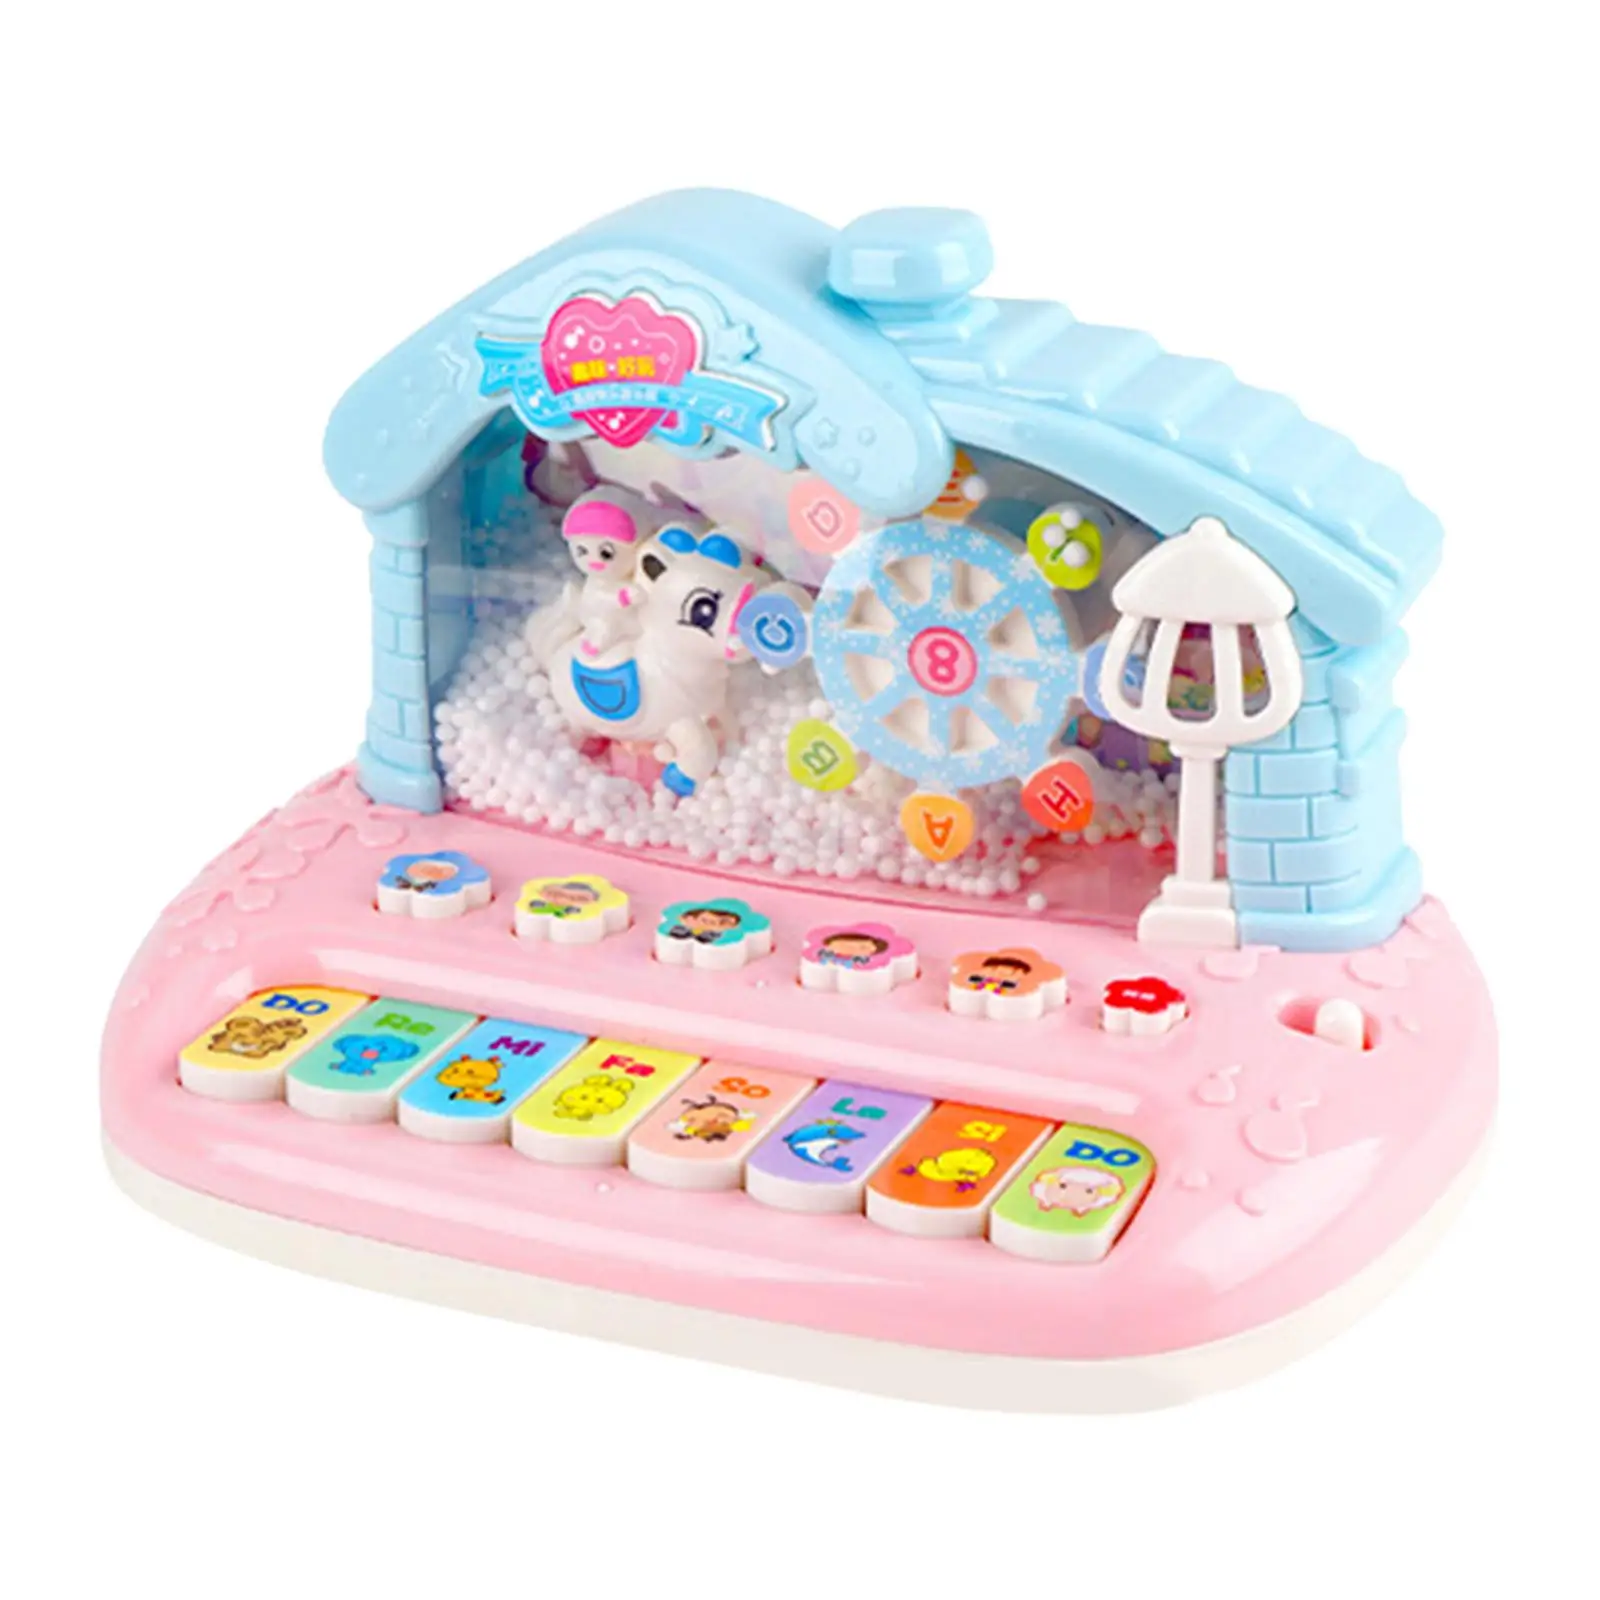 Electric Keyboard Children Piano Toy for 1 2 3 Year Old Boys Girls Kids